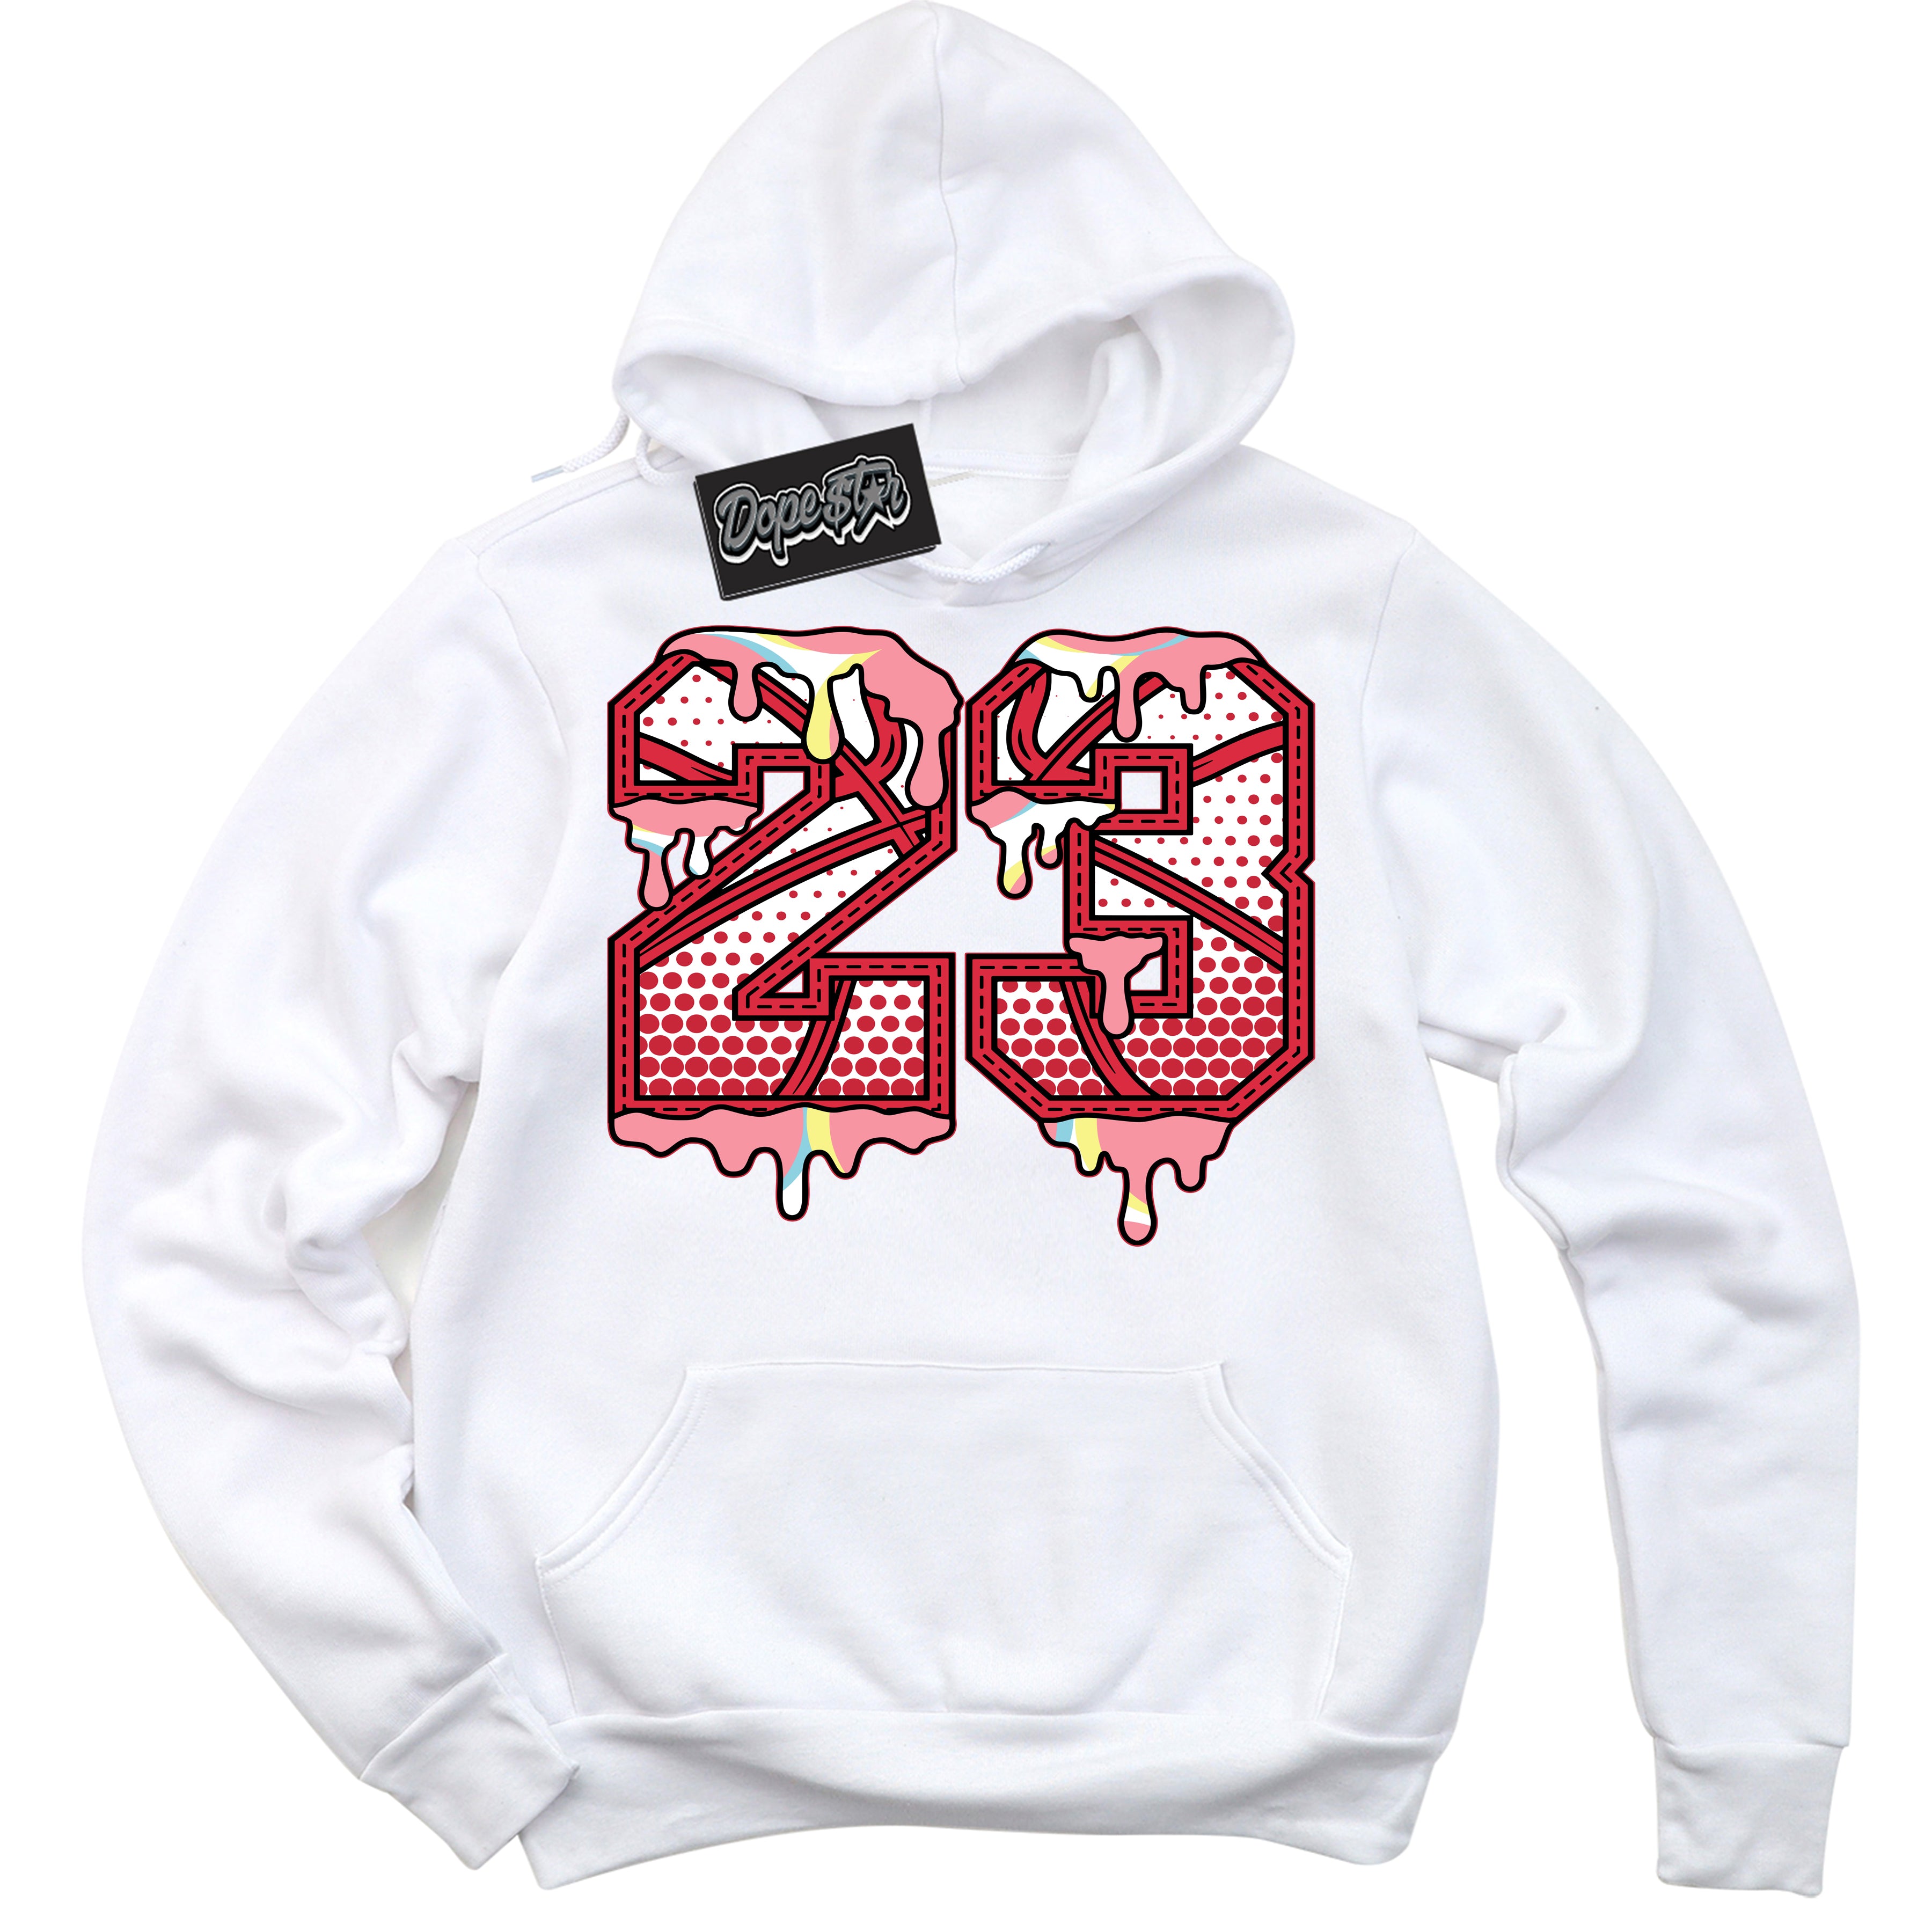 Cool White Graphic DopeStar Hoodie with “ 23 Ball “ print, that perfectly matches Spider-Verse 1s sneakers